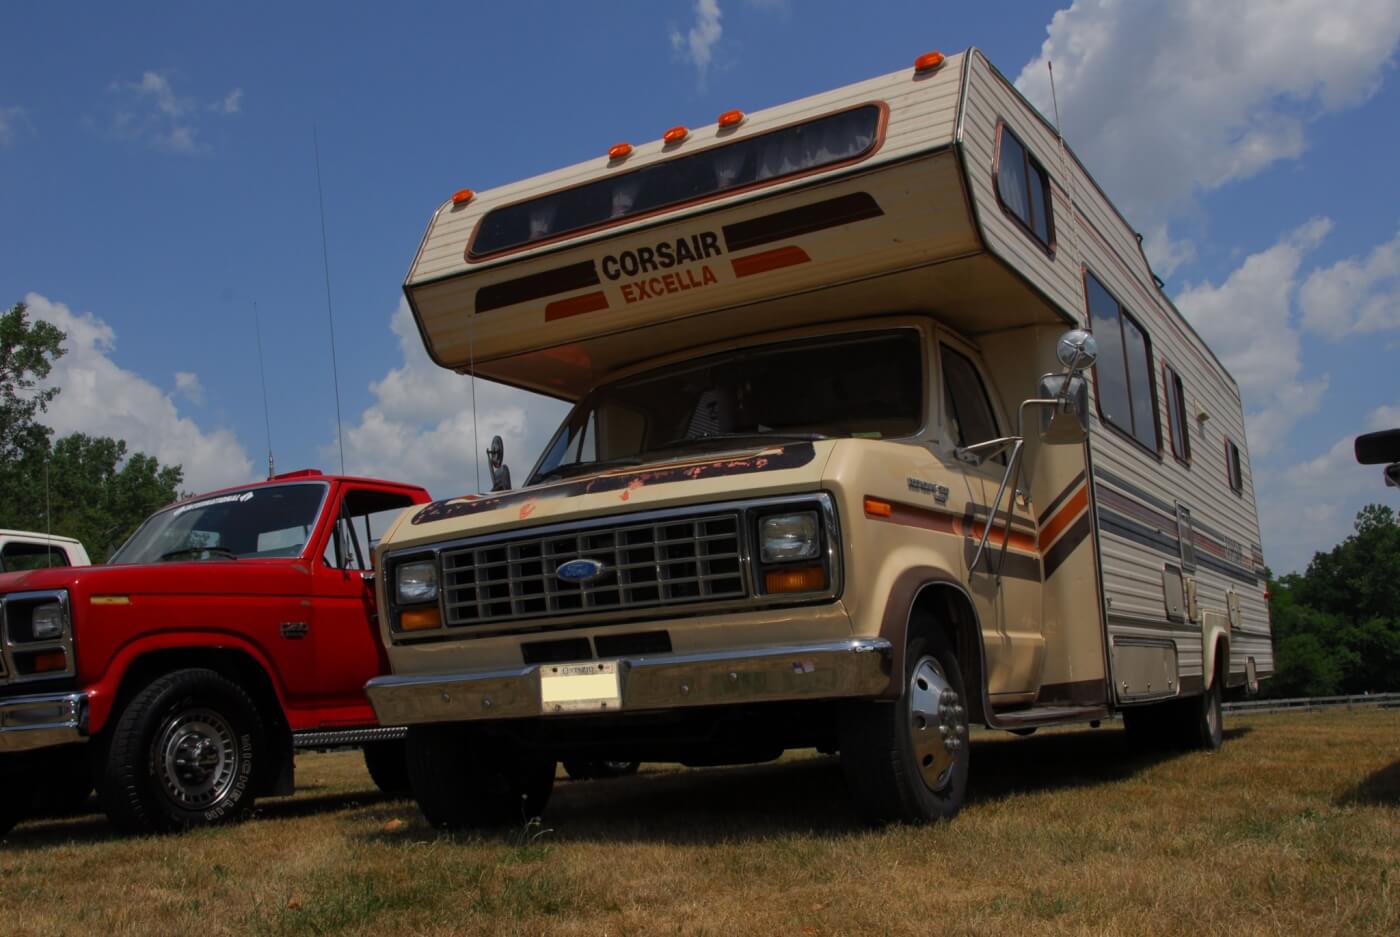 The E-250 and E-350 vans were available with the IDI diesel, but only with an automatic transmission. The diesel E-350 dually chassis was popular for motor homes and well-liked for its fuel economy, which was significantly better than the big-block gasser. Jonathan Lalonde of Ontario, Canada, owns this 26-foot 1987 F-350 Corsair with a 6.9-liter IDI, C6 automatic and 3.54 gears. Last count, this rig had nearly 170,000 miles on it.